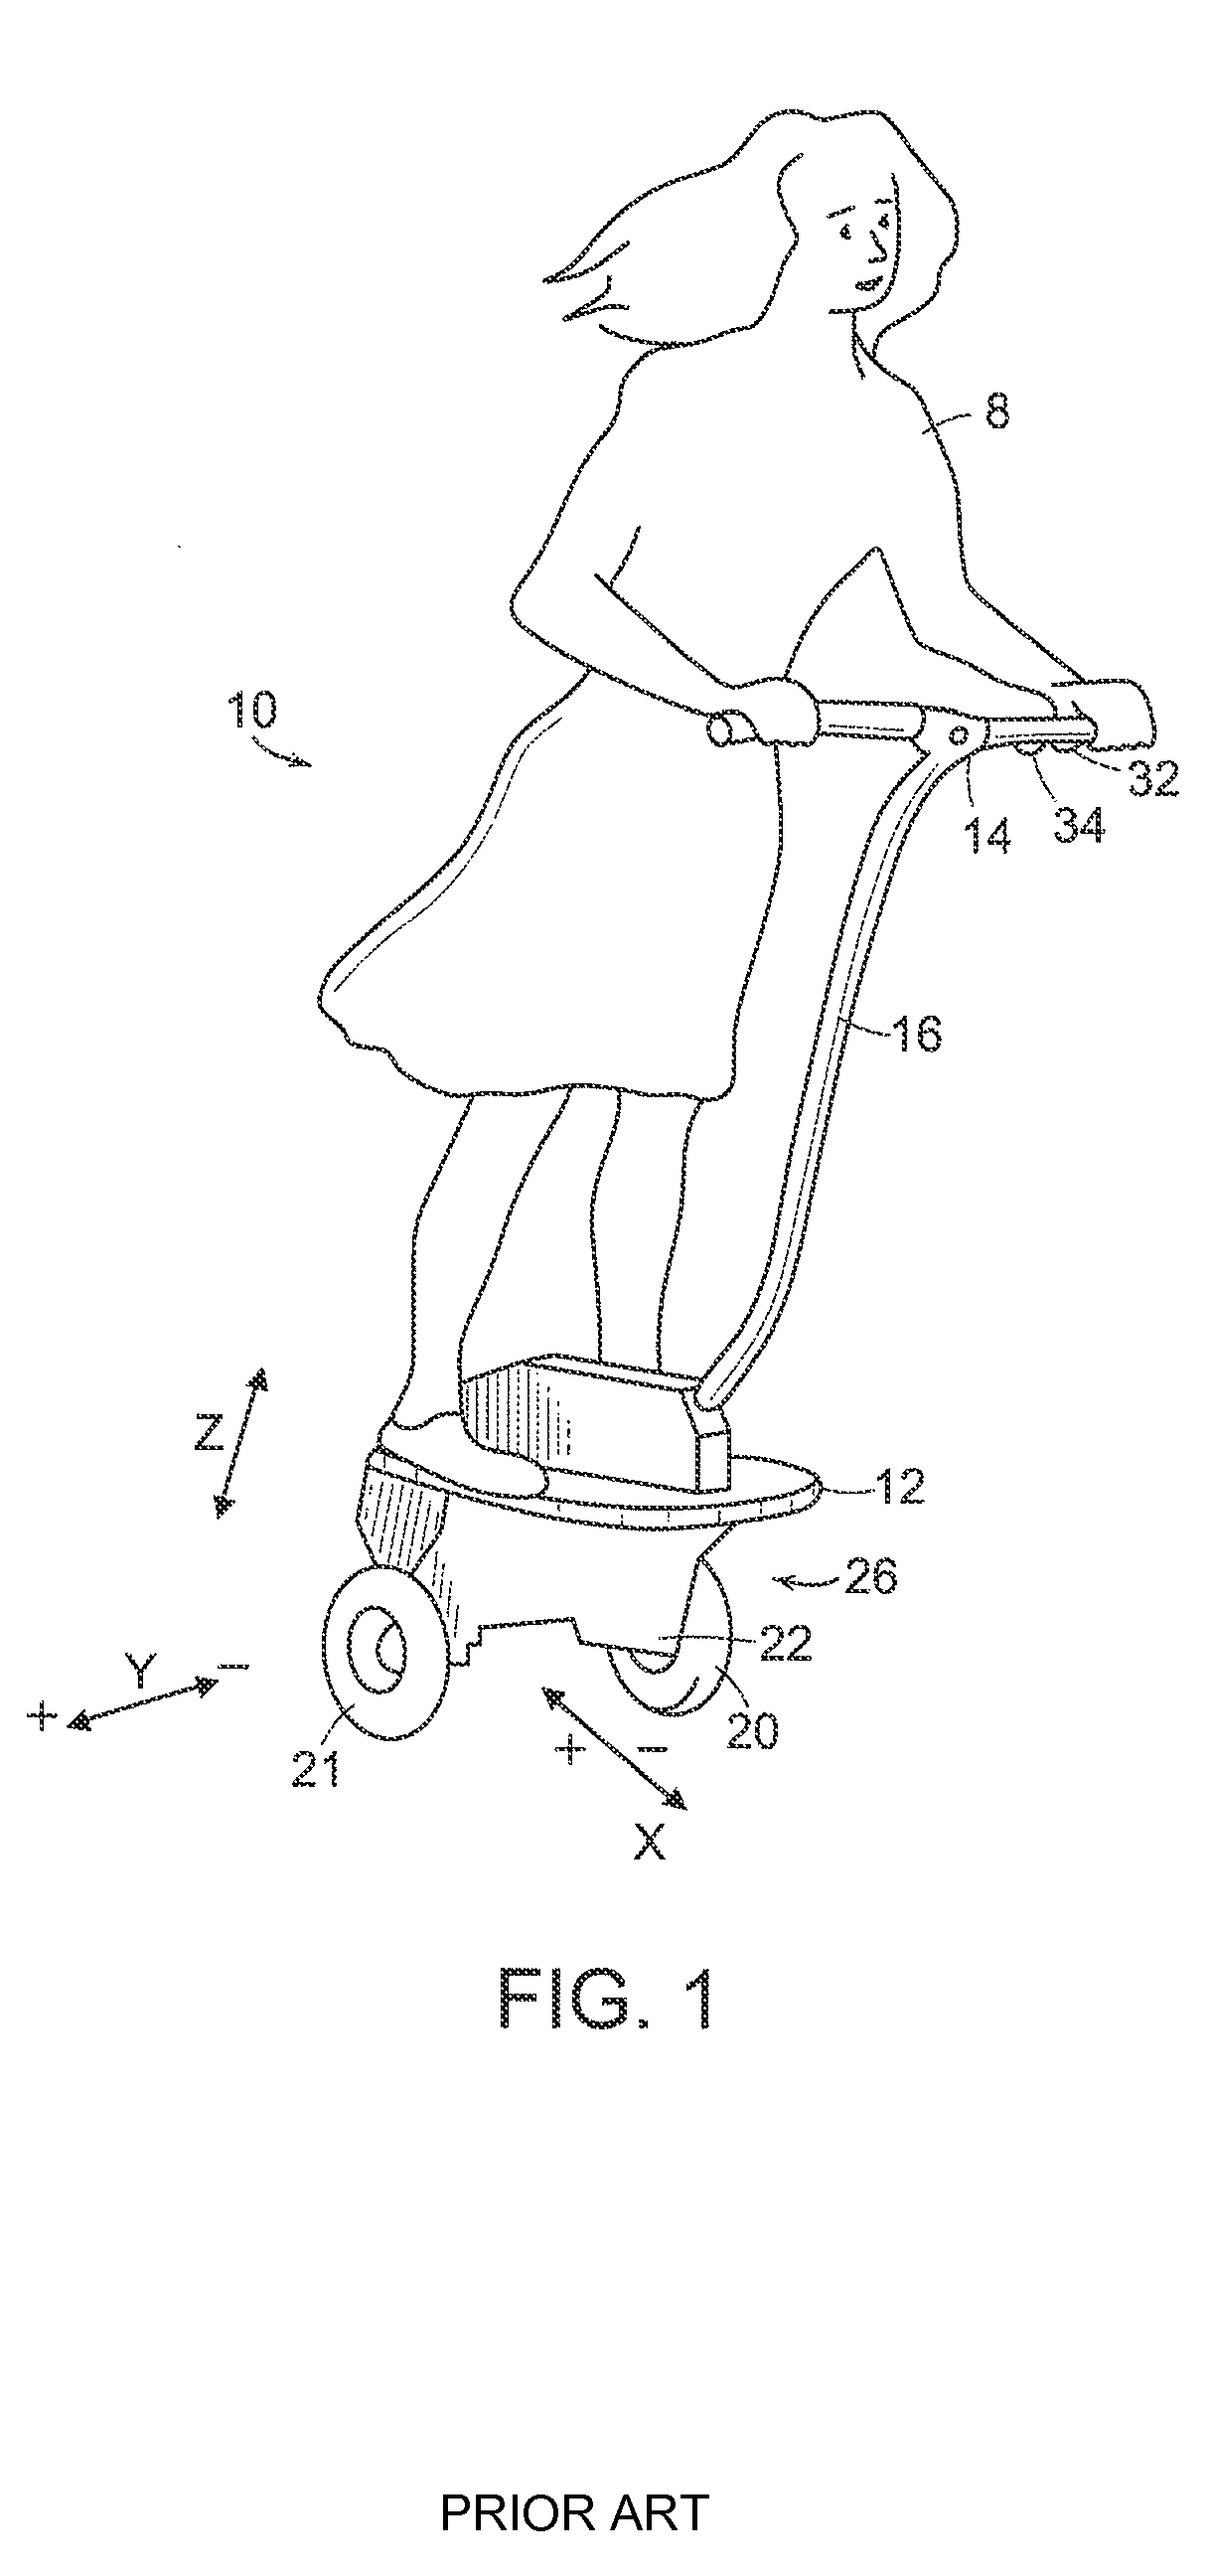 Methods and apparatus for moving a vehicle up or down a sloped surface